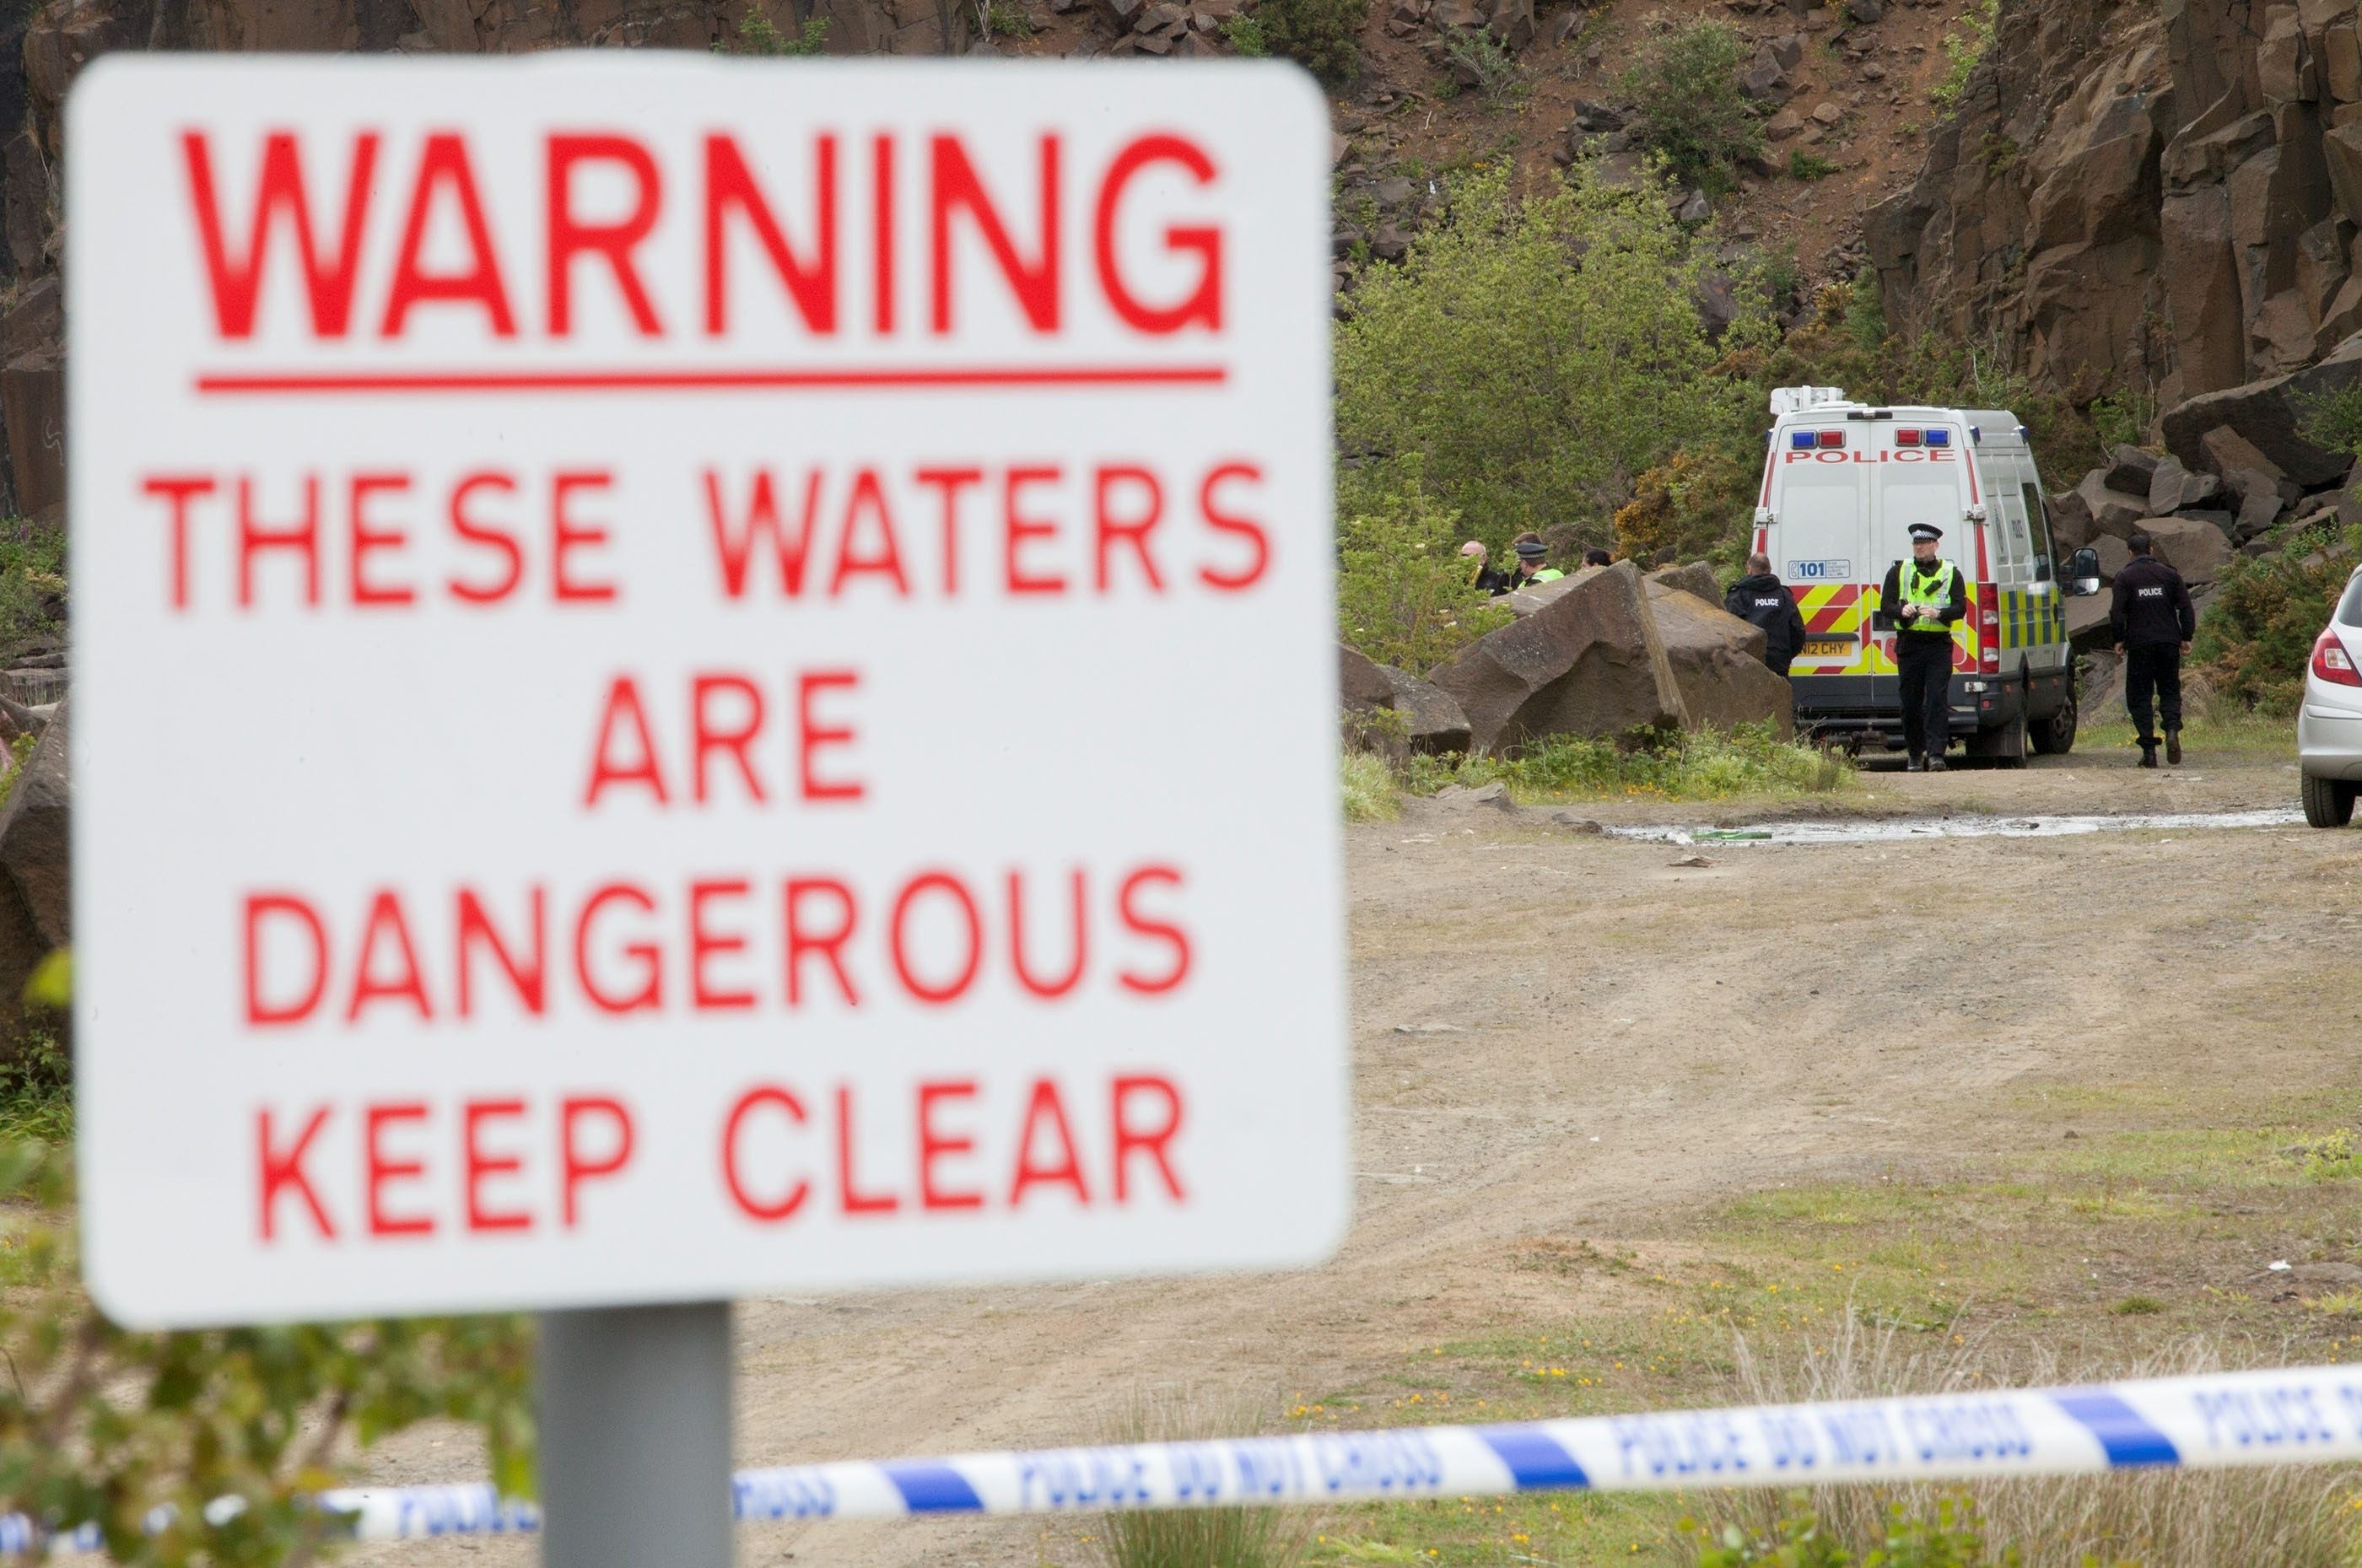 Police divers recovered the body from Prestonhill Quarry in Inverkeithing